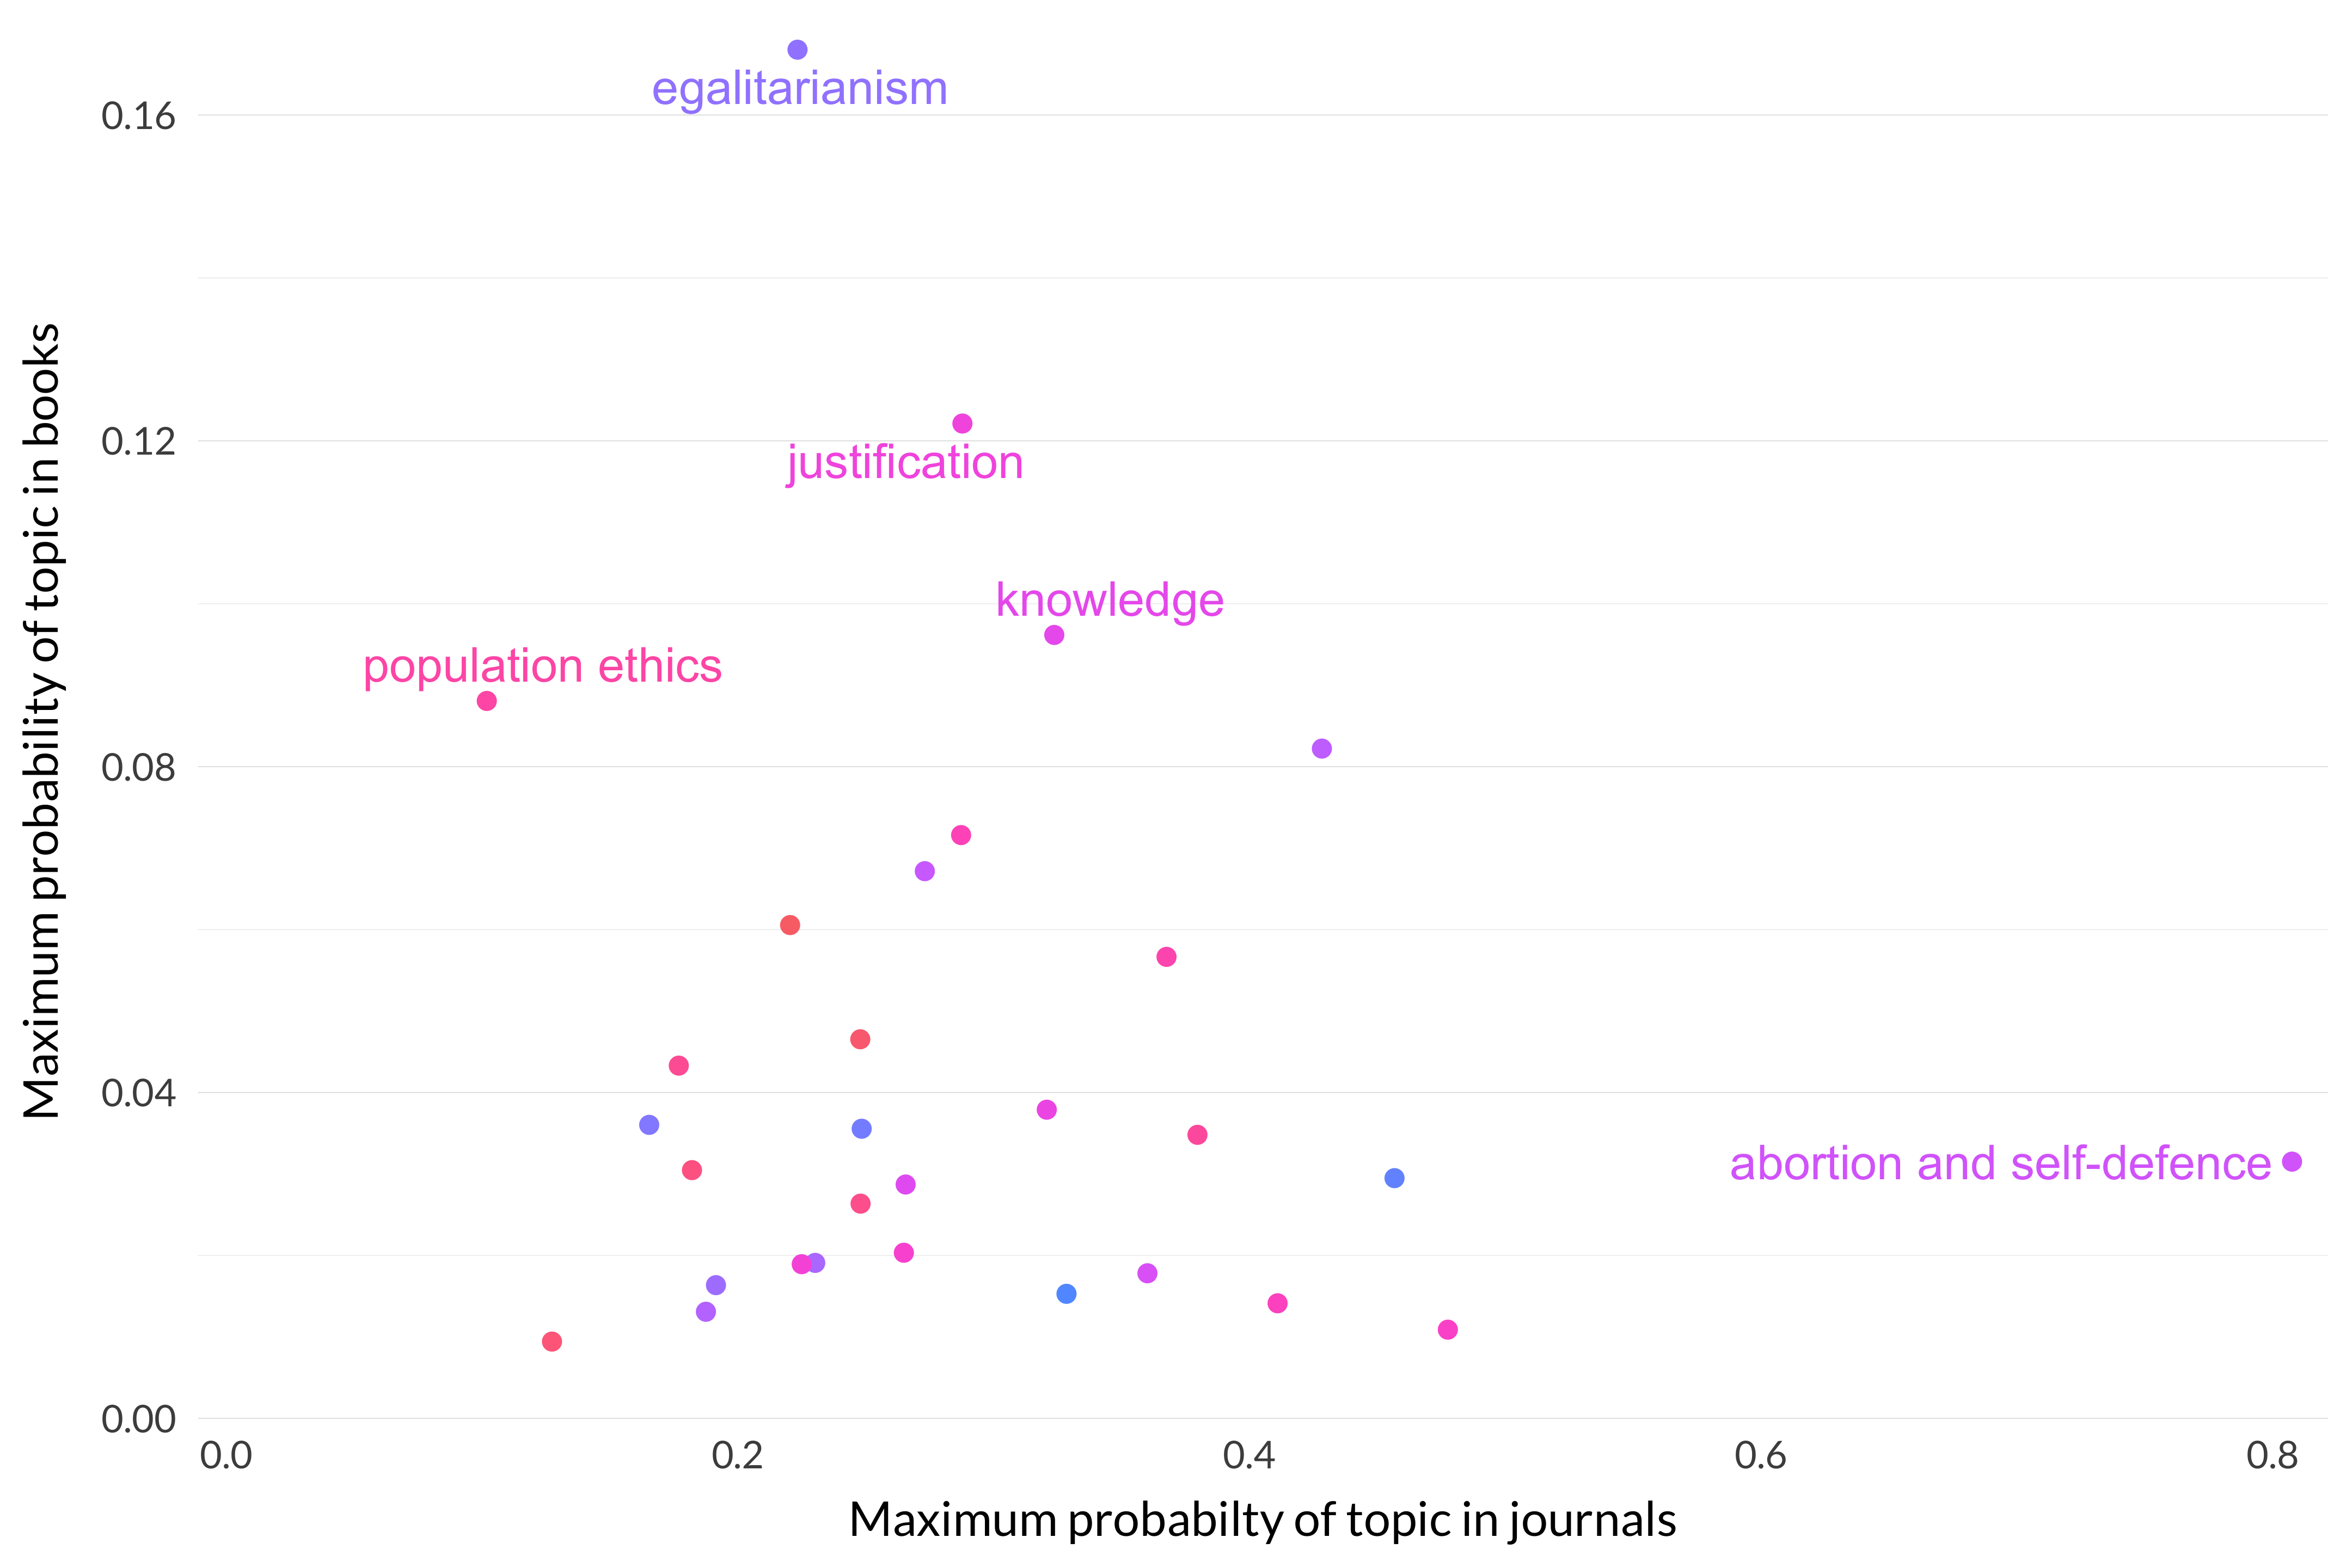 A scatterplot comparing the maximum probability distribution of topics 61-90 in journal articles up to 1925 and in the books being discussed. The maximum probablity for journals is higher for all topics than for the maximum probability for books. Abortion and self-defense is the most extreme data-point, and is much higher in journal articles than in books.